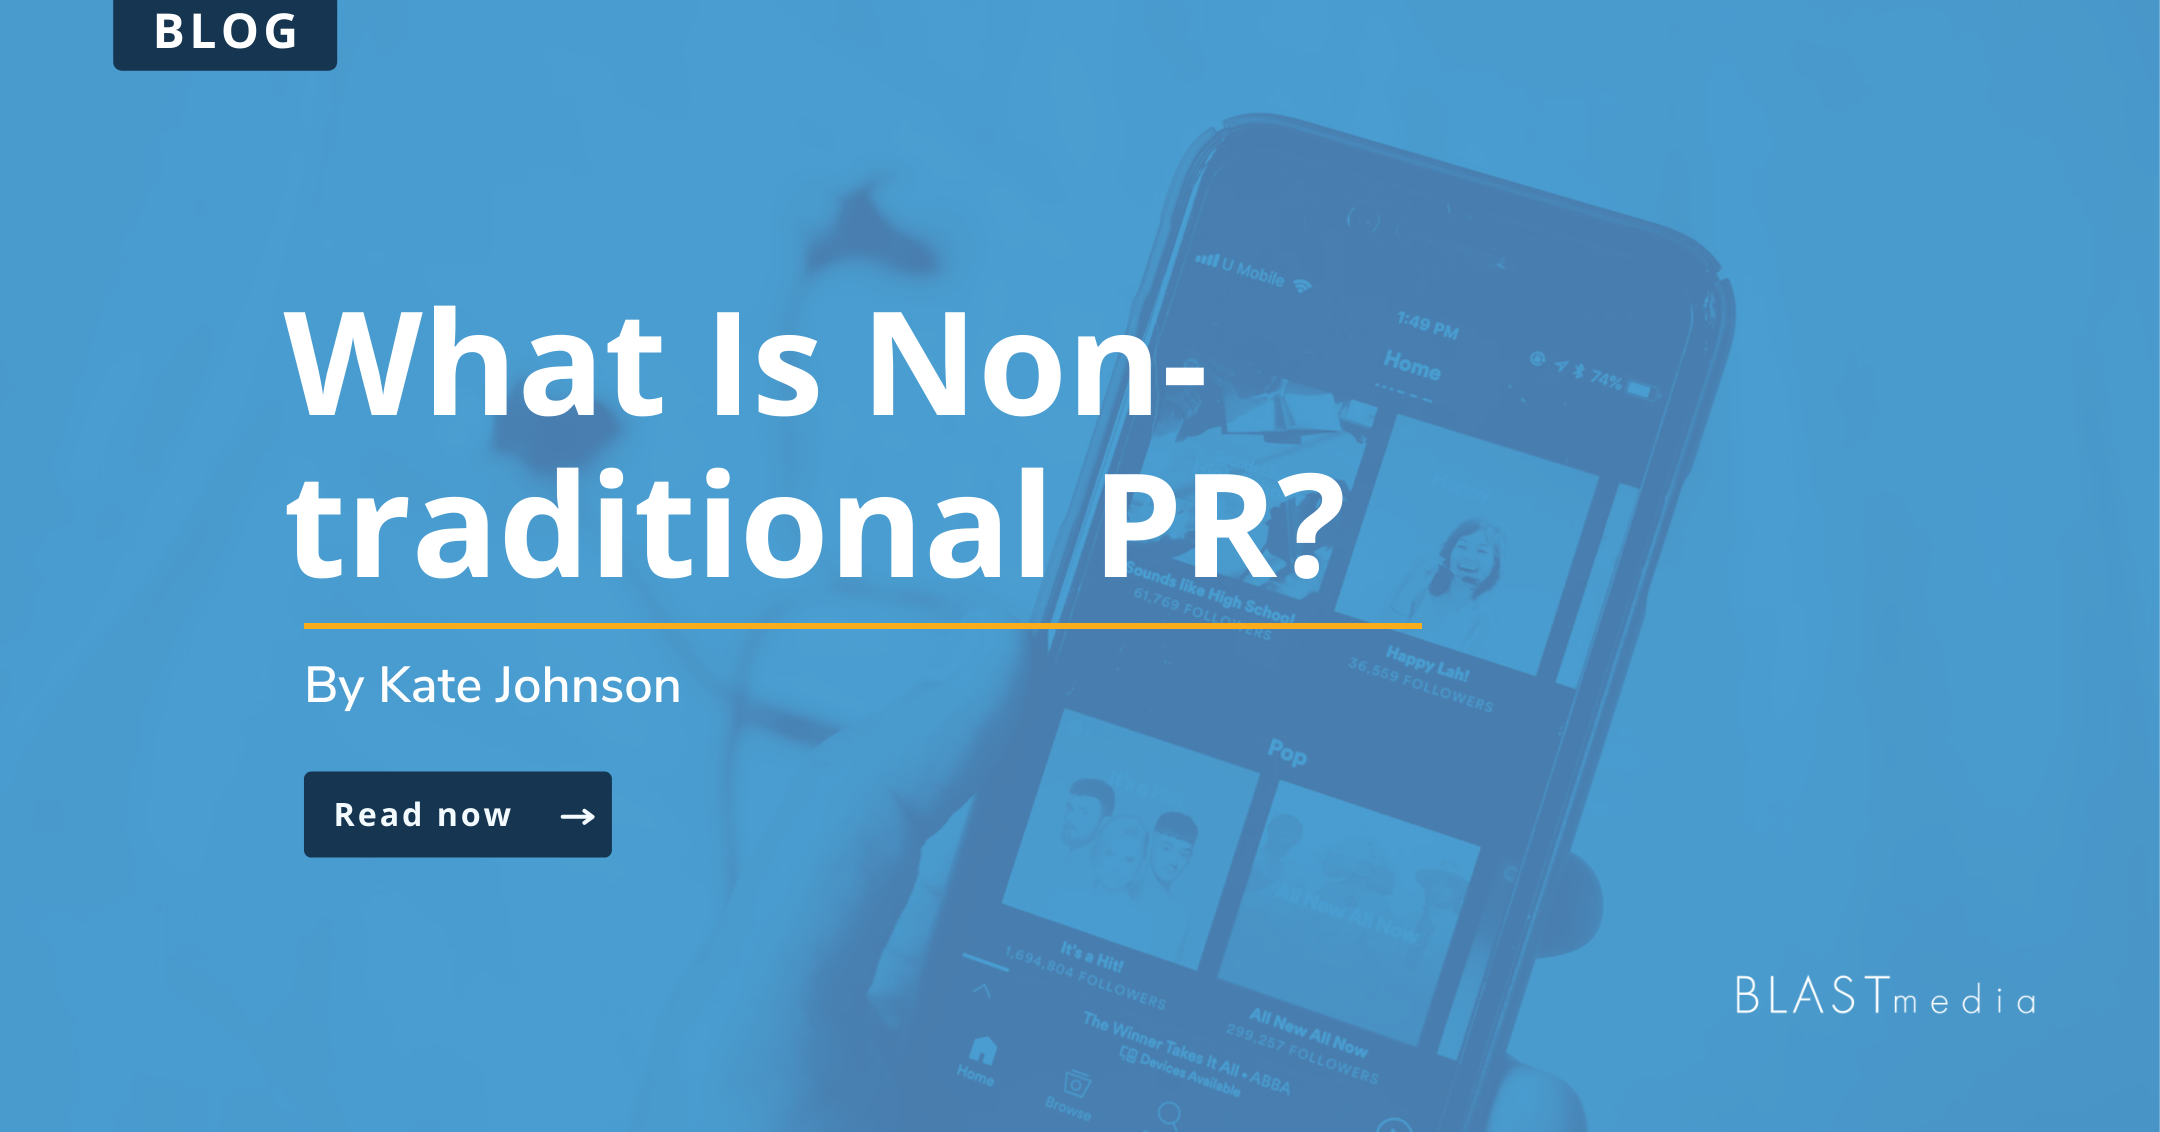 What Is Non-traditional PR?